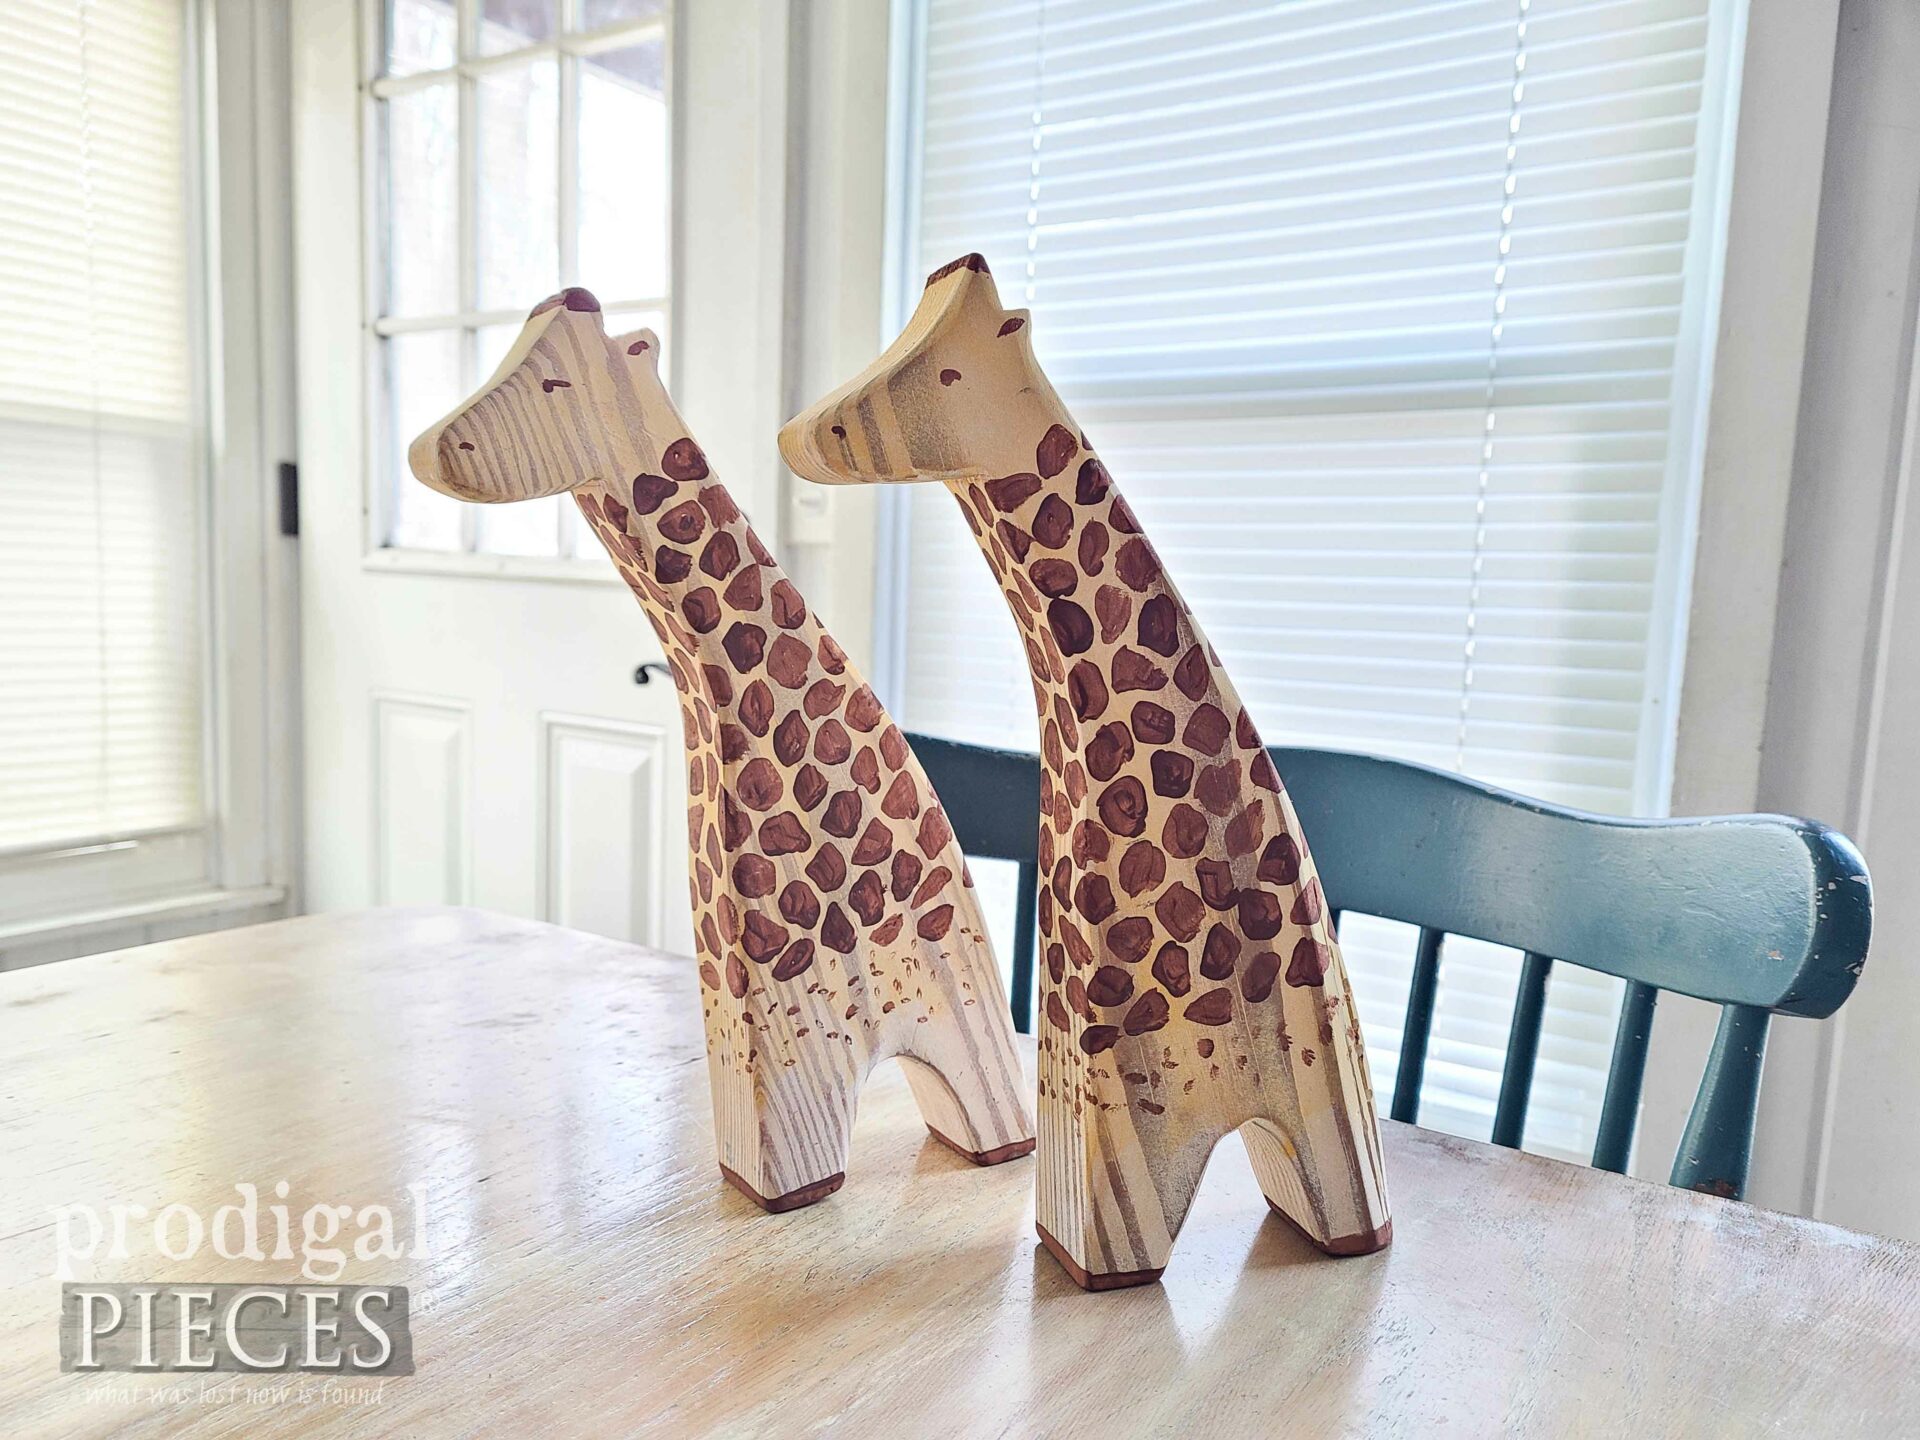 Handmade Wooden Giraffes from an Upcycled Table by Larissa of Prodigal Pieces | prodigalpieces.com #prodigalpieces